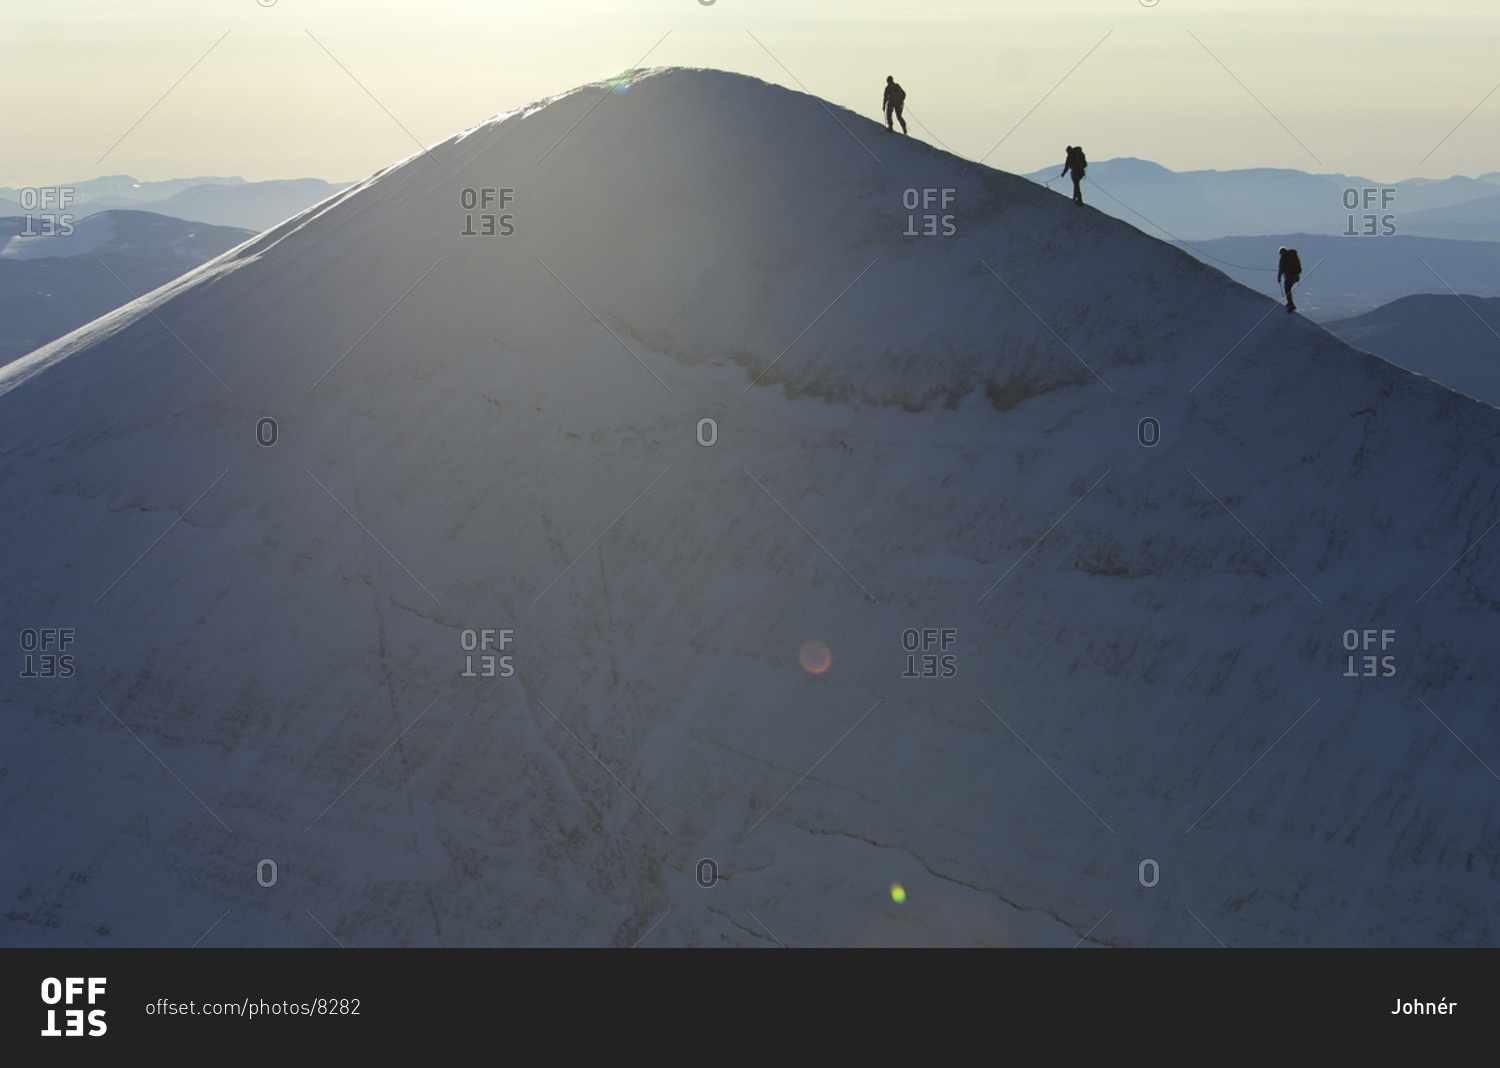 Mountain climbing, alpinism, on top of the Kebnekaise mountain, Giebnegaise, 2104 meters